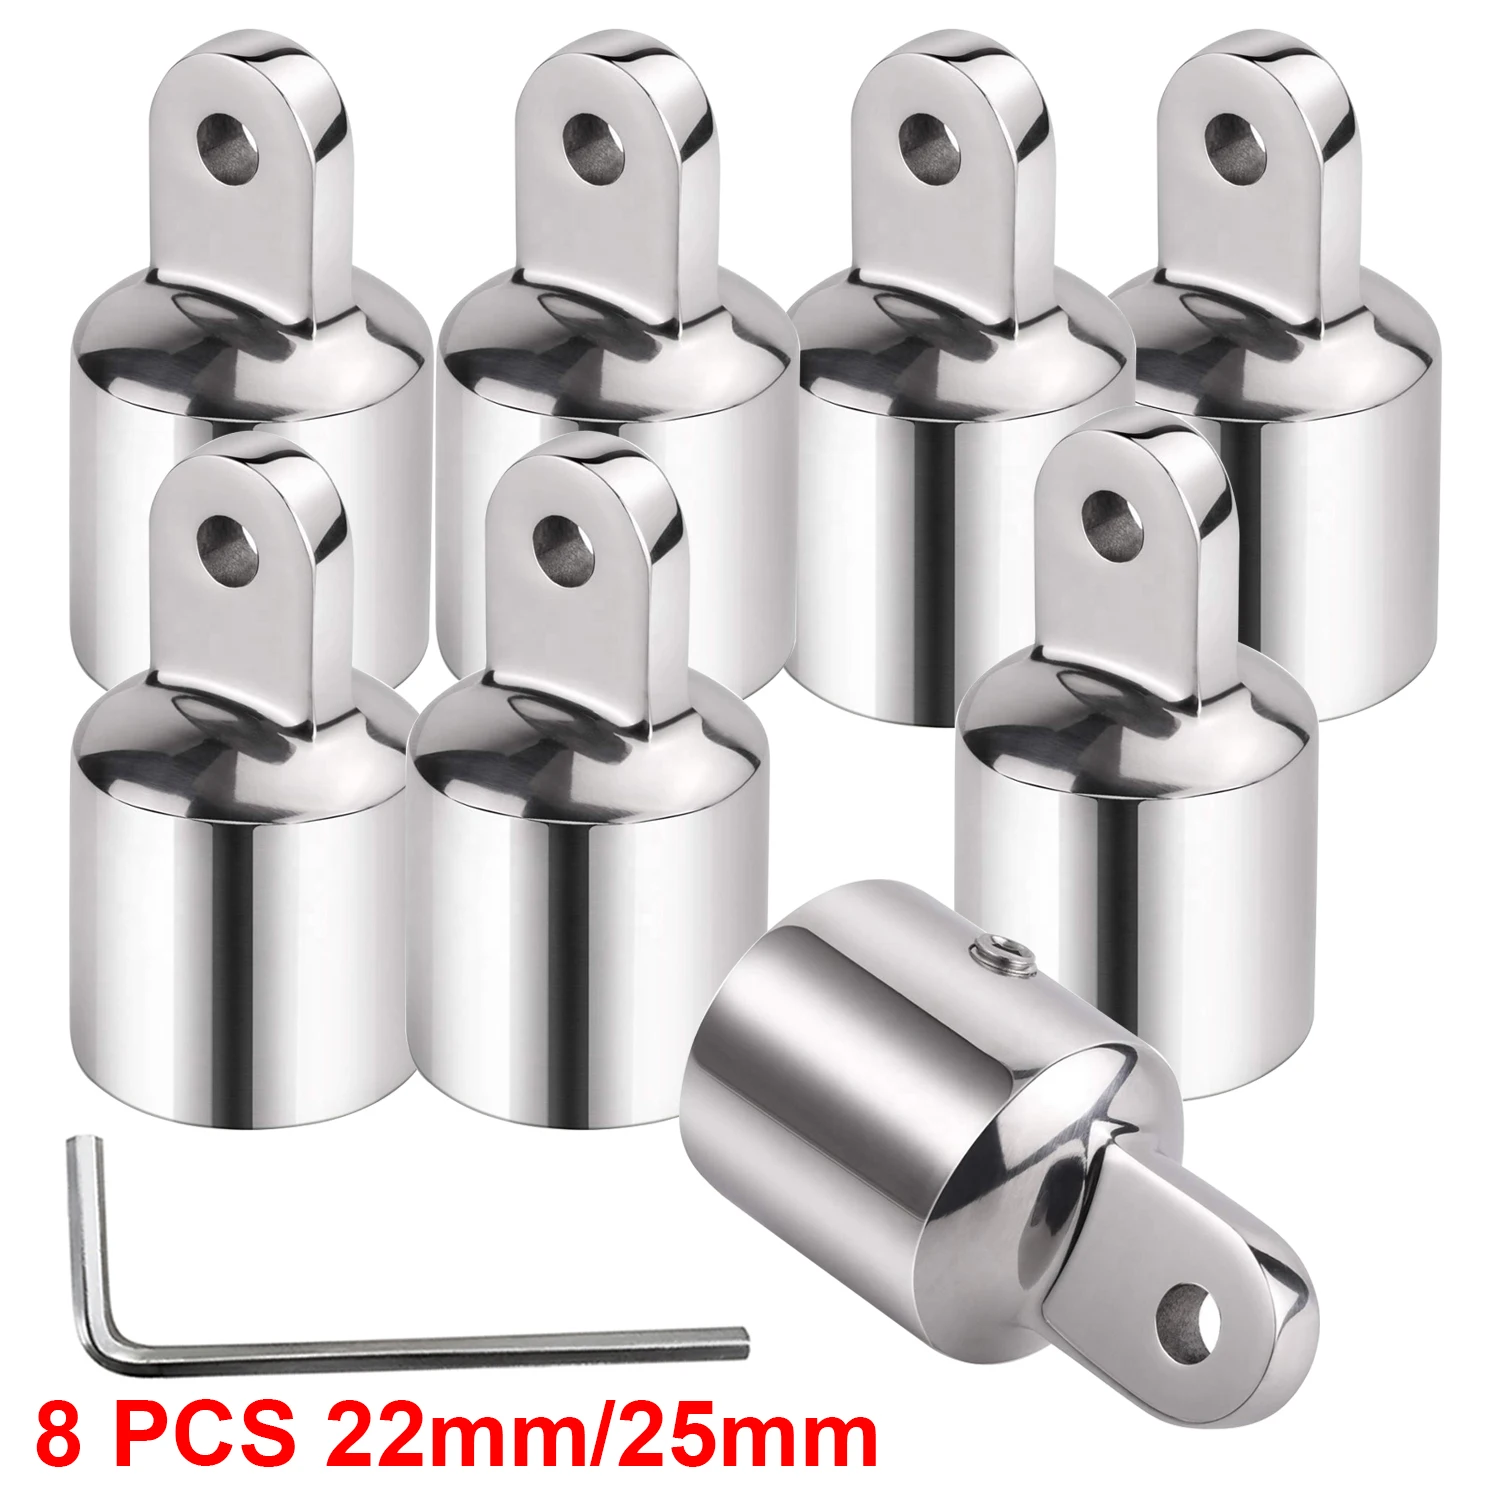 Enlarge 8 PCS 22mm/25mm Bimini Top Hardware Fitting Eye End Cap Stainless Steel 316 External Eye End Boat Canopy Fitting